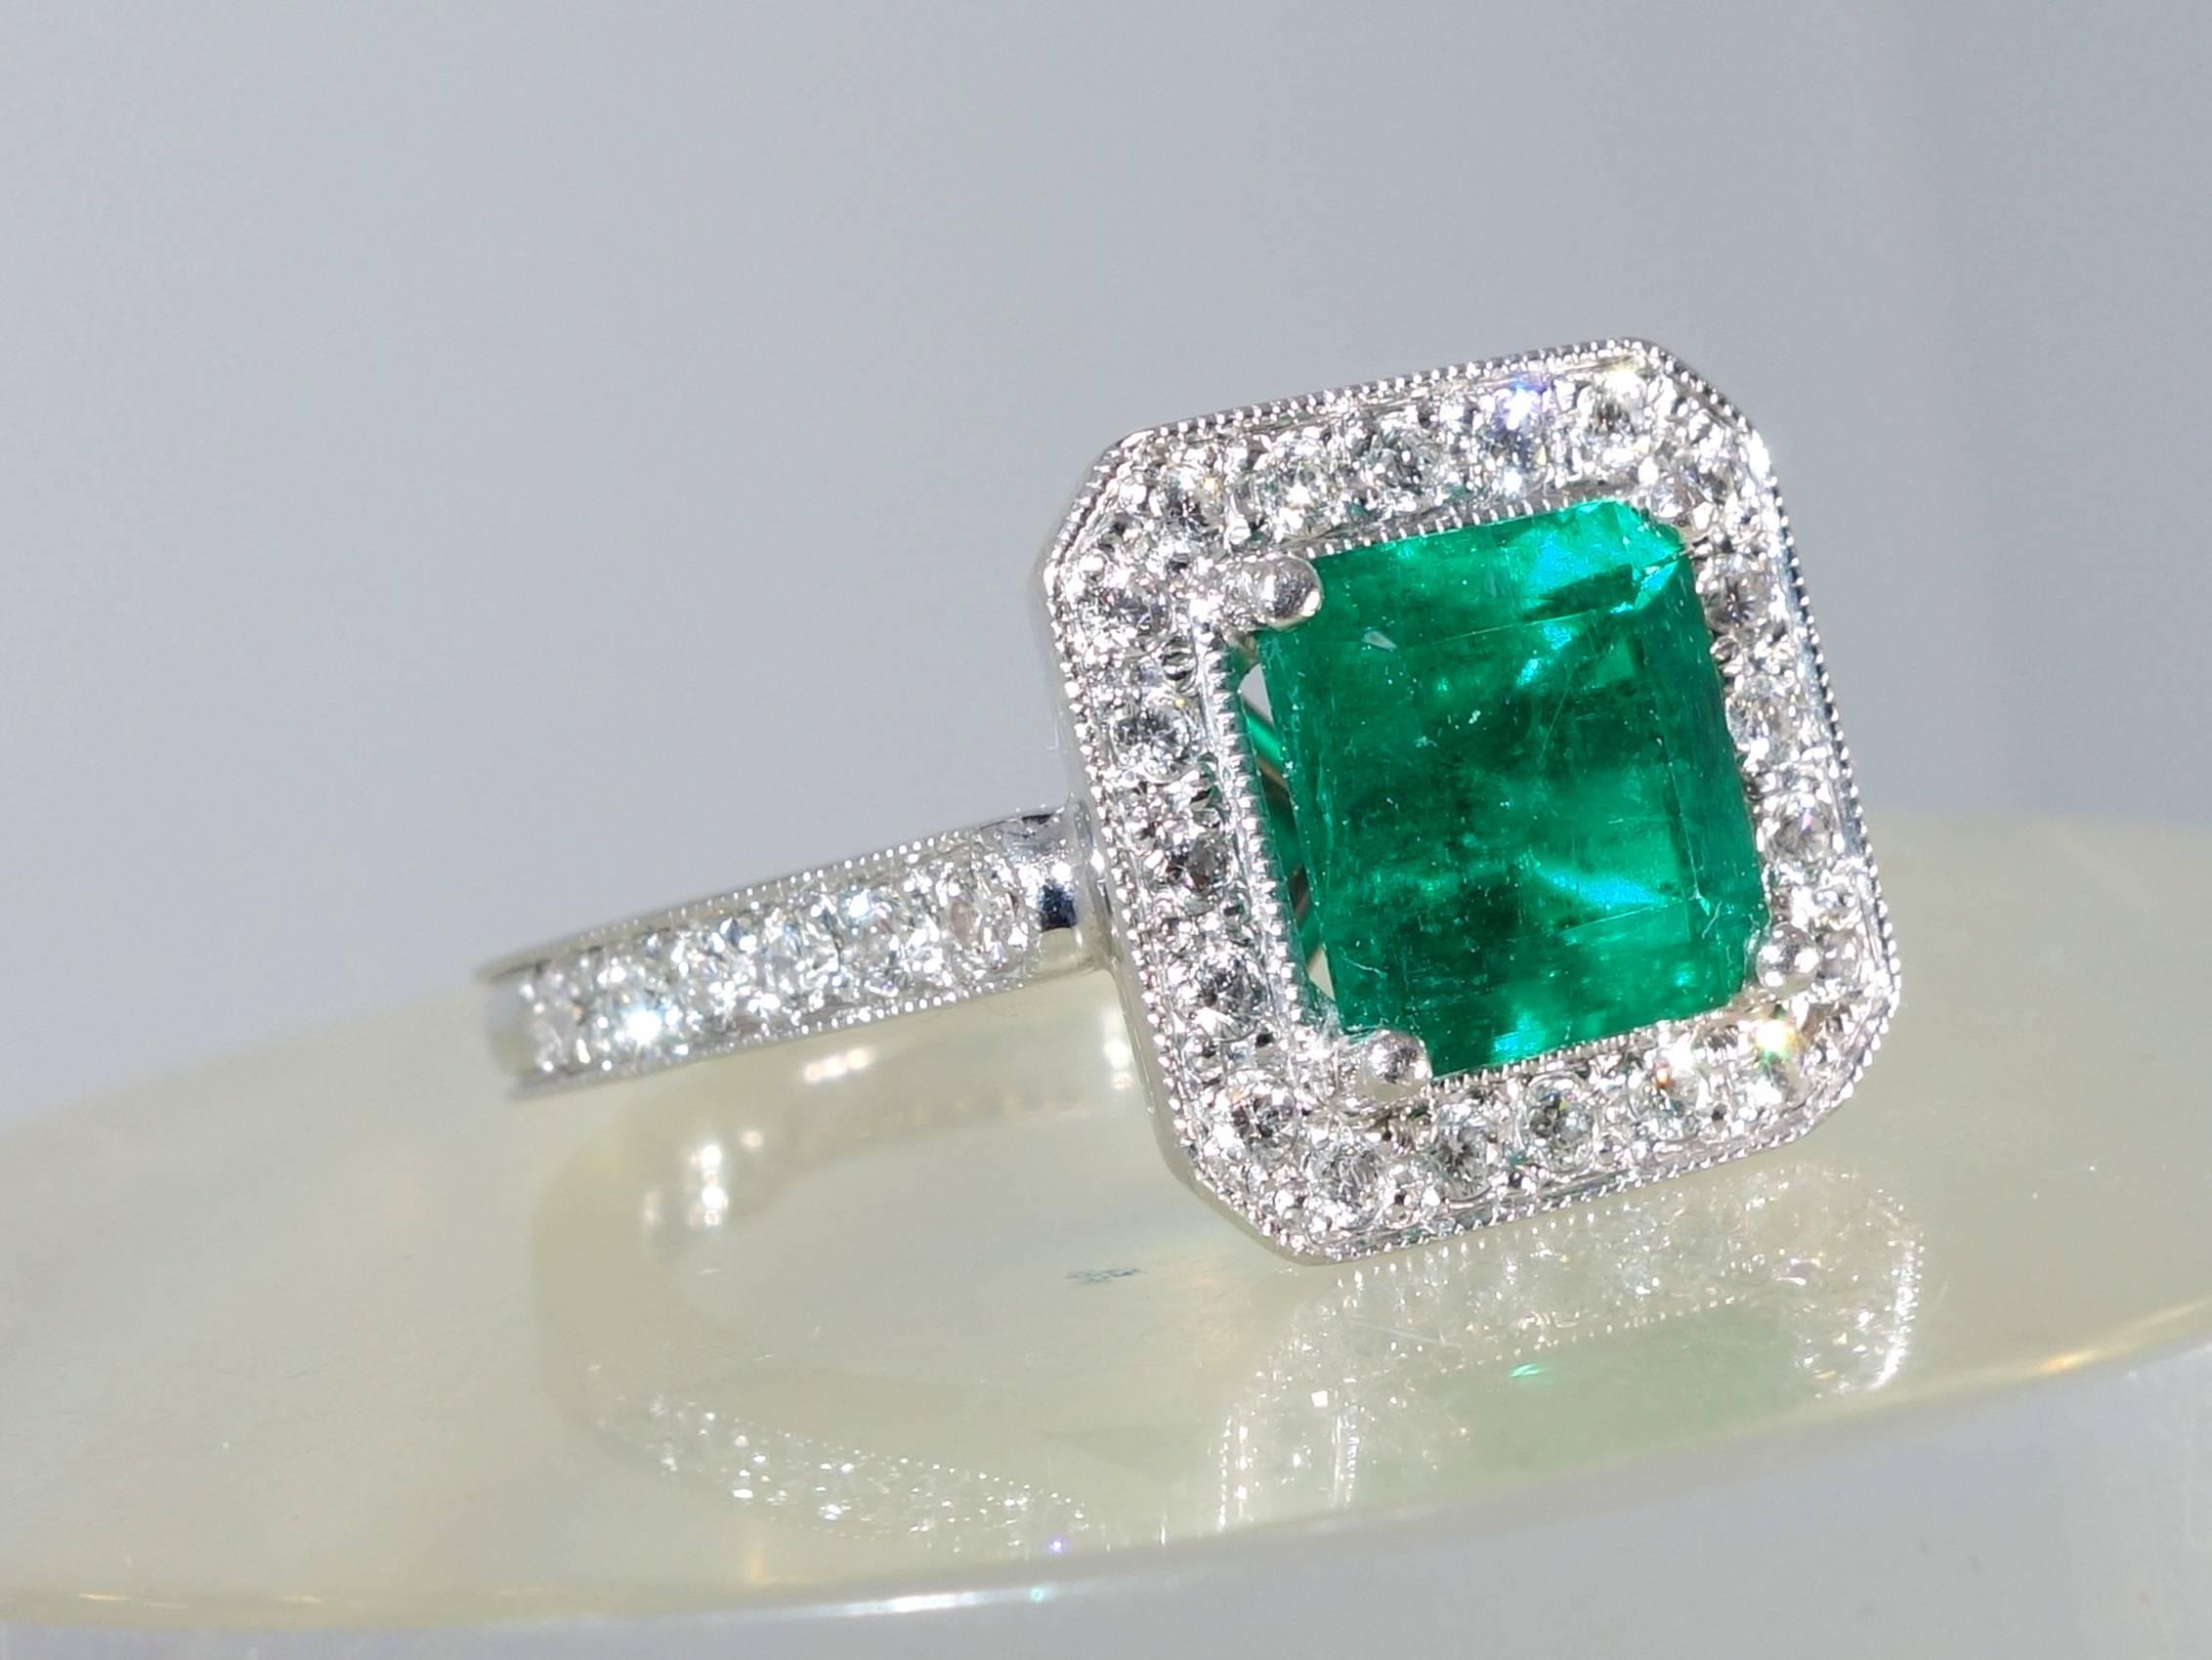 32 fine white diamonds (H/VVS) are bead set around a fine natural emerald.  These diamonds weigh approximately .54 cts.  The center emerald which displays a bright green color weighs approximately 1.91 cts.  This platinum ring is a size 6 and can